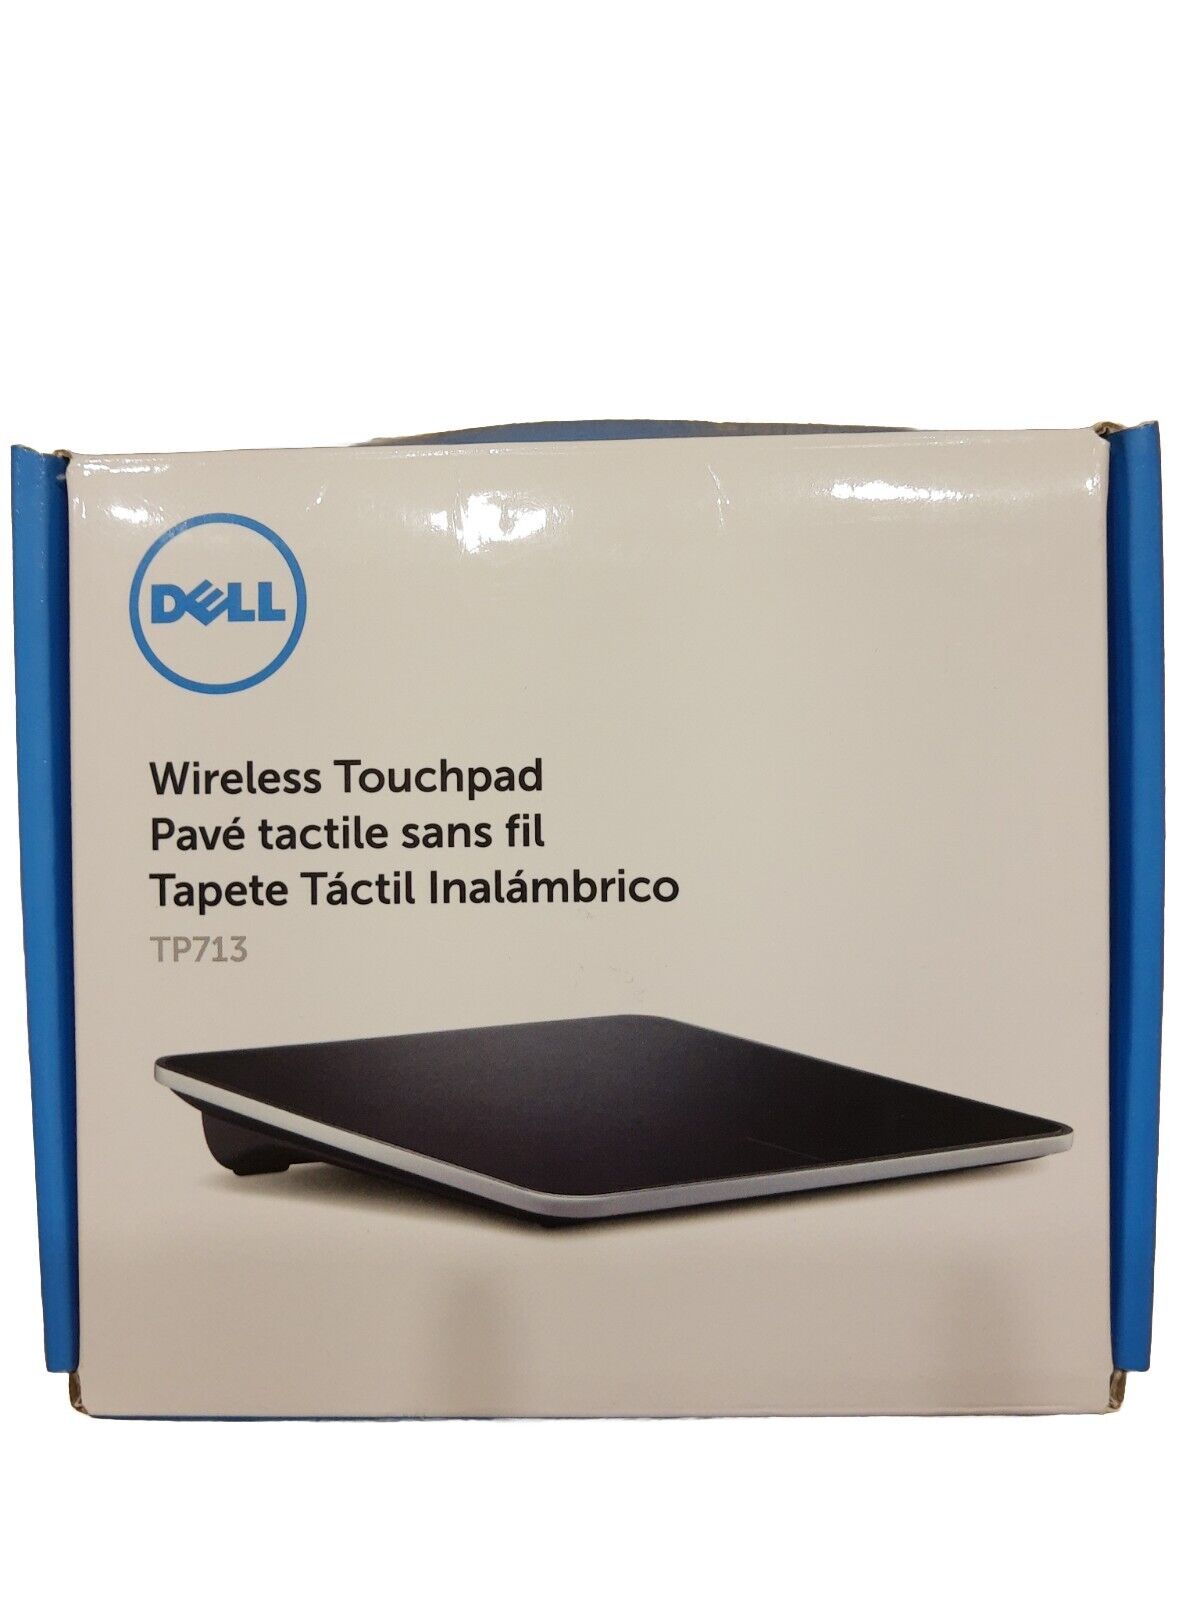 DELL WIRELESS TOUCHPAD TP713-NEW SEE